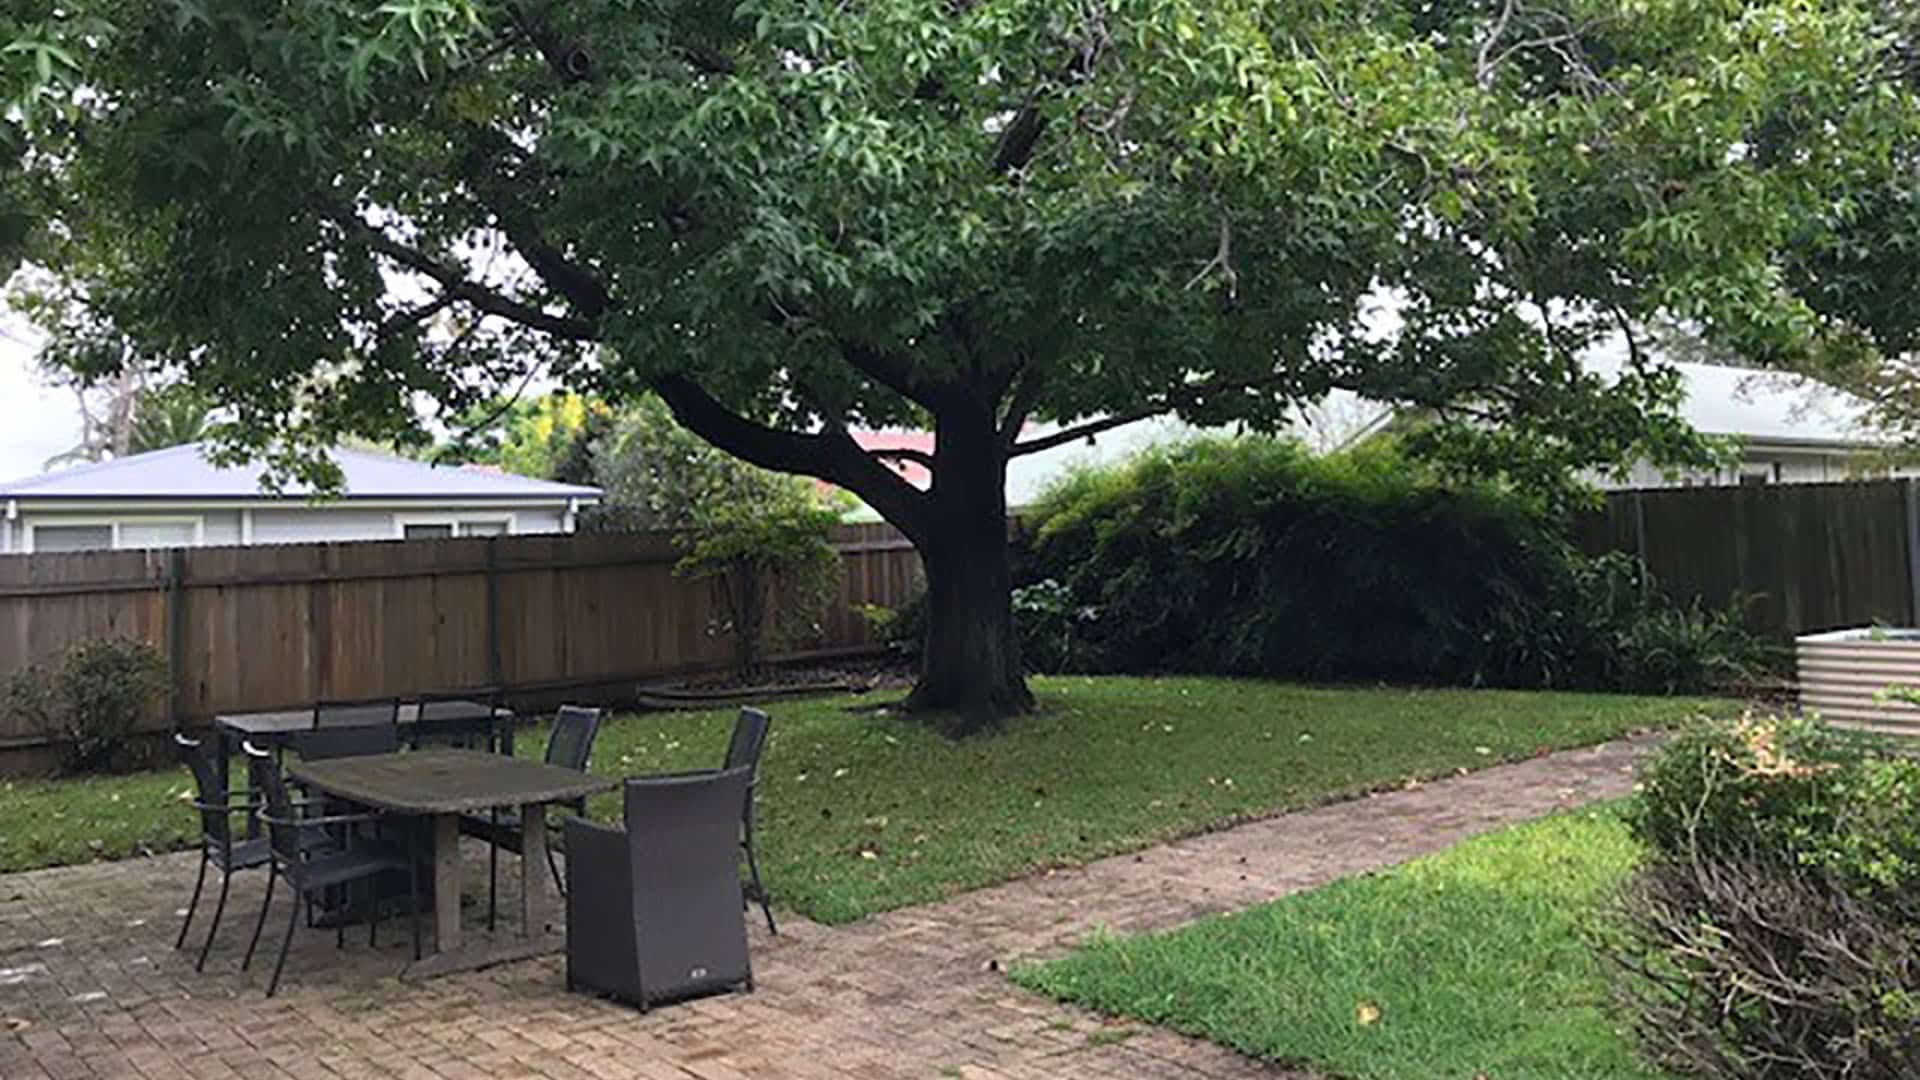 Backyard with large tree and grassed area with garden beds.